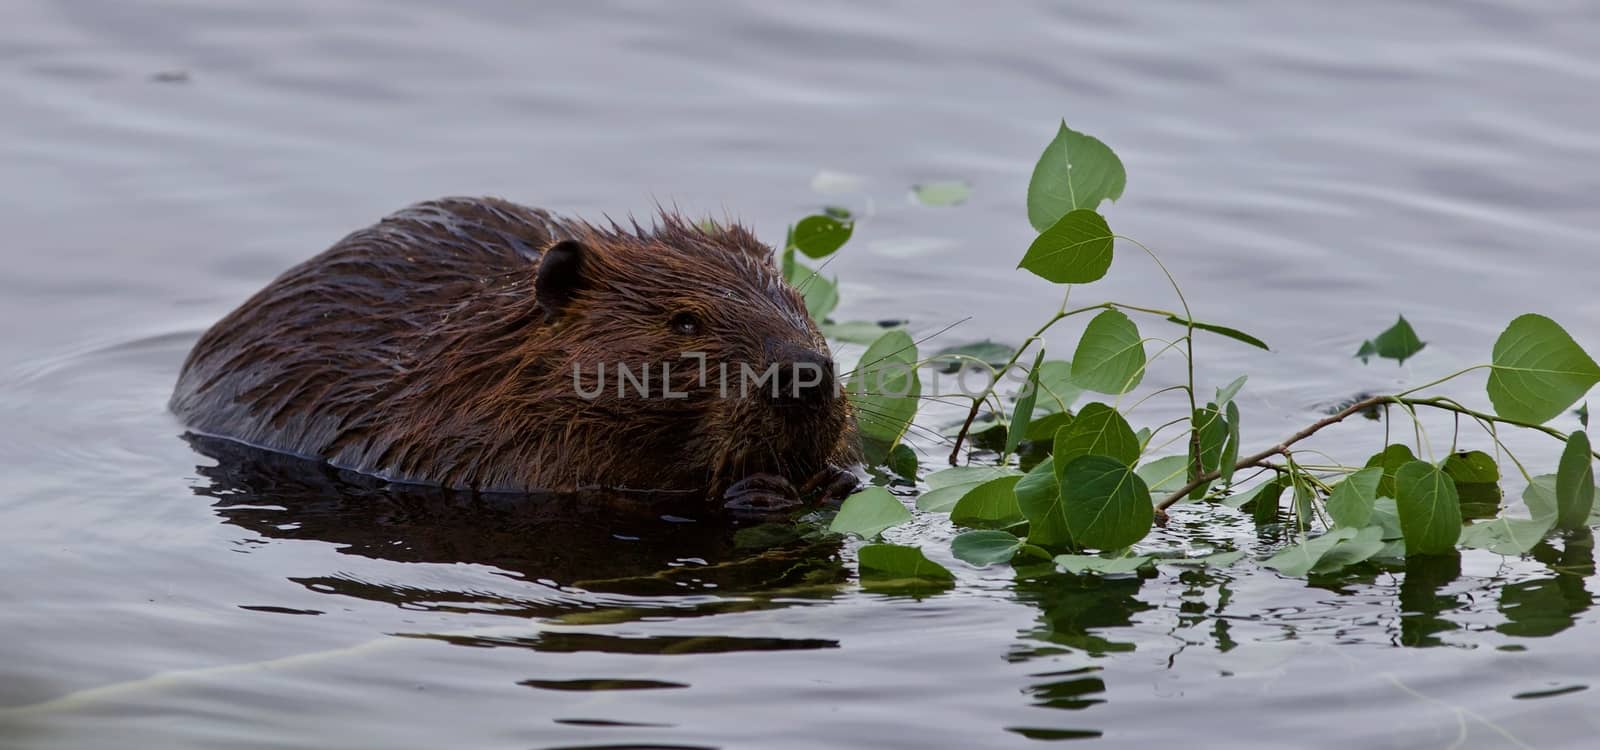 Beautiful background with a beaver eating leaves in the lake by teo